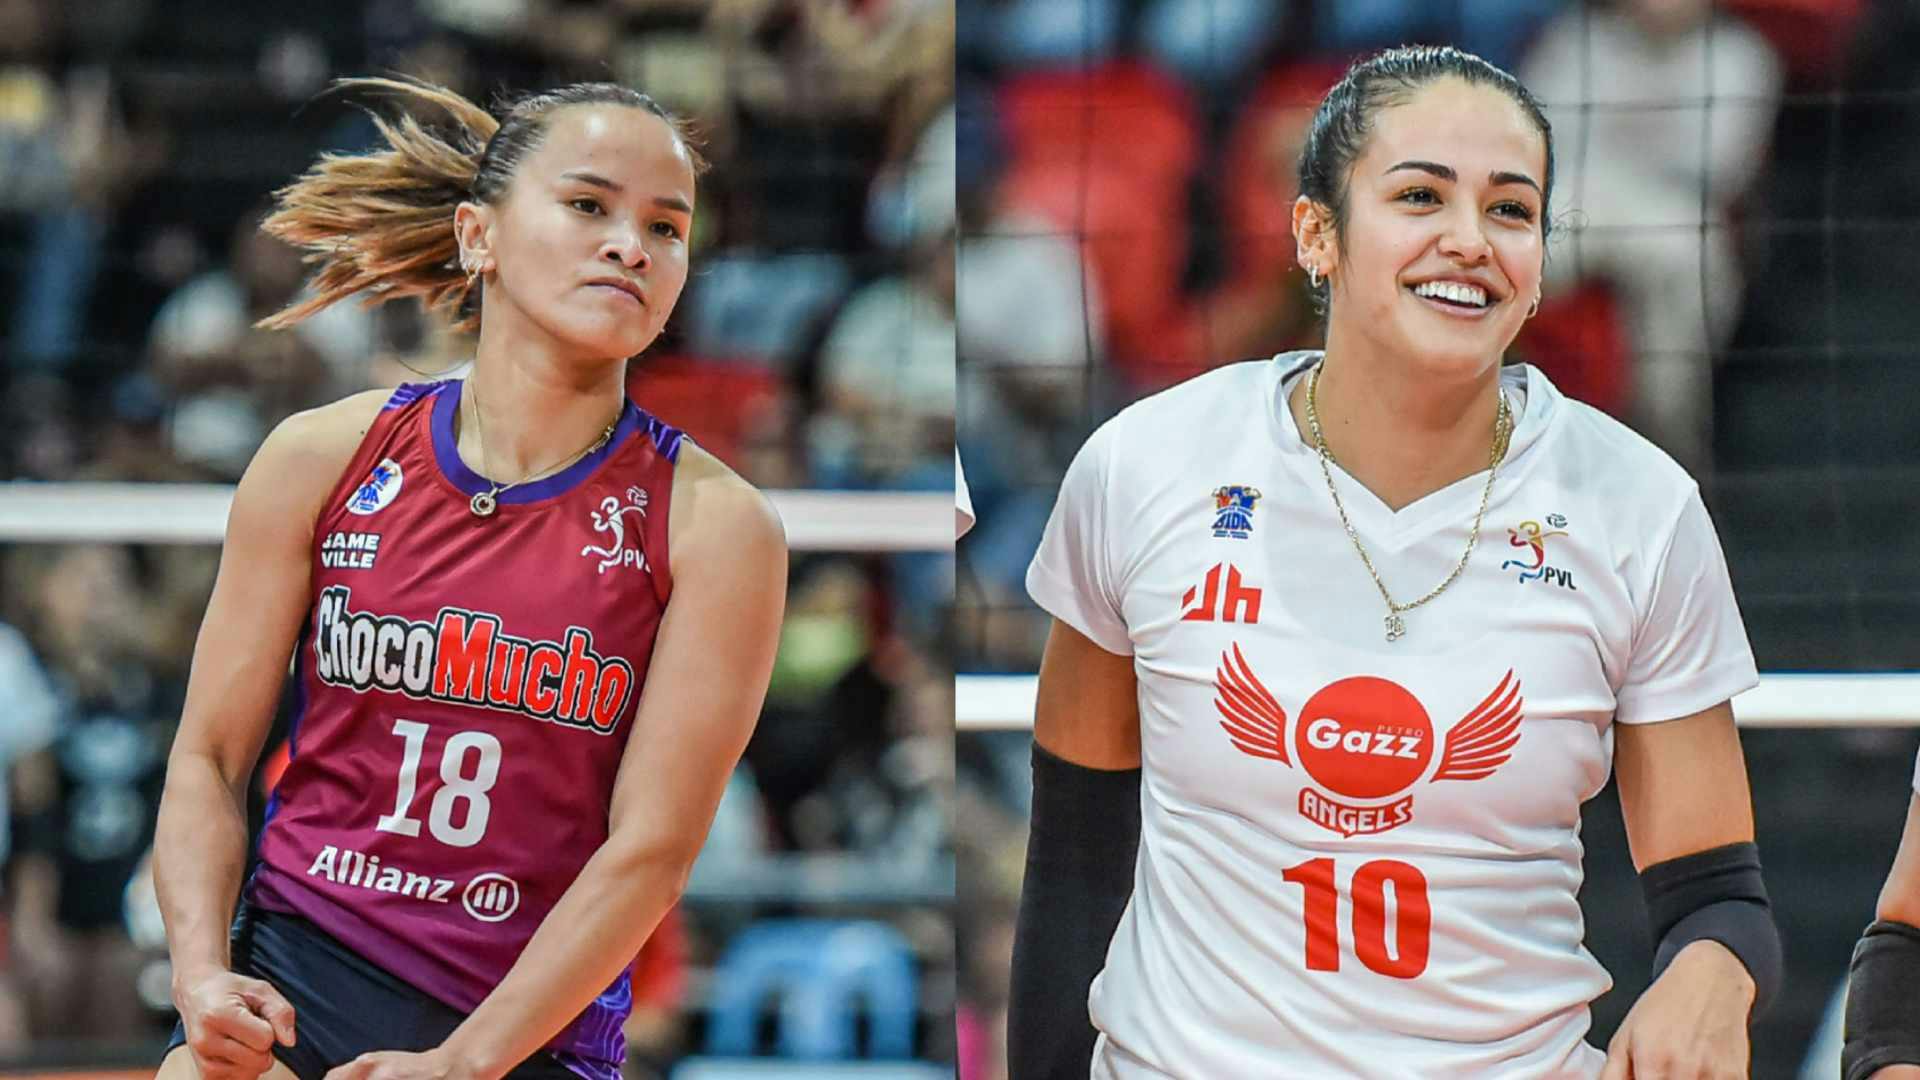 
PVL: Sisi Rondina in awe of Brooke Van Sickle after first showdown
